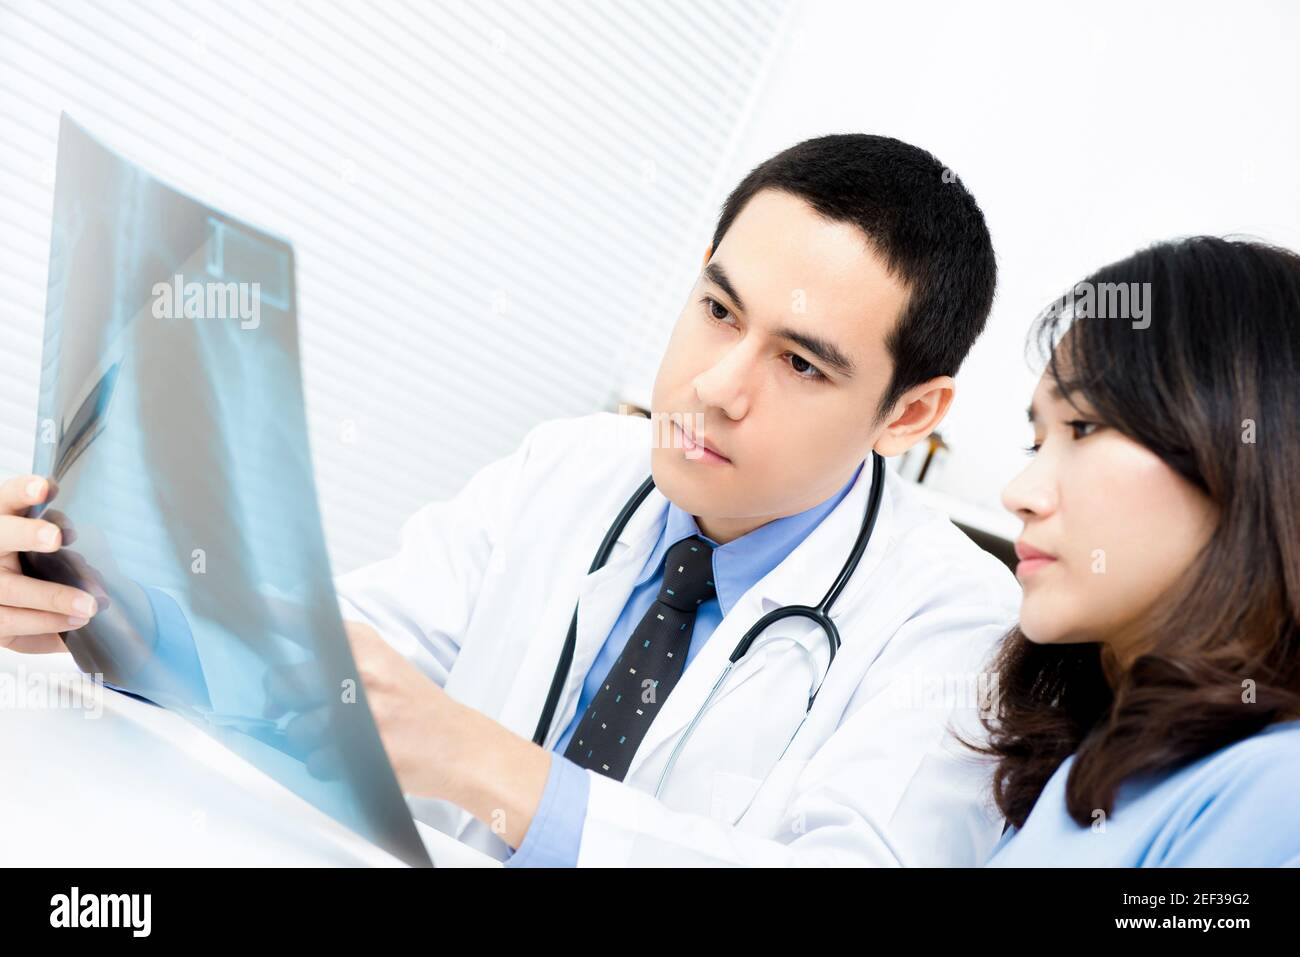 Doctor showing x-ray image to woman patient Stock Photo